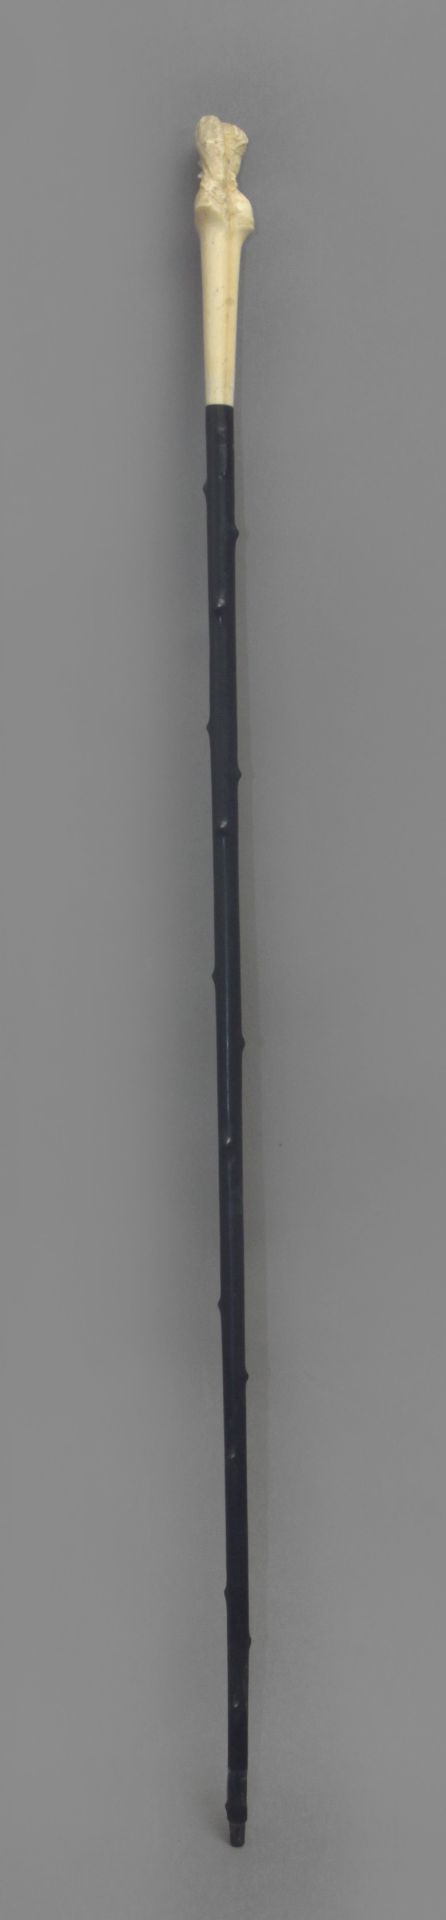 A 19th century walking stick. - Image 5 of 8